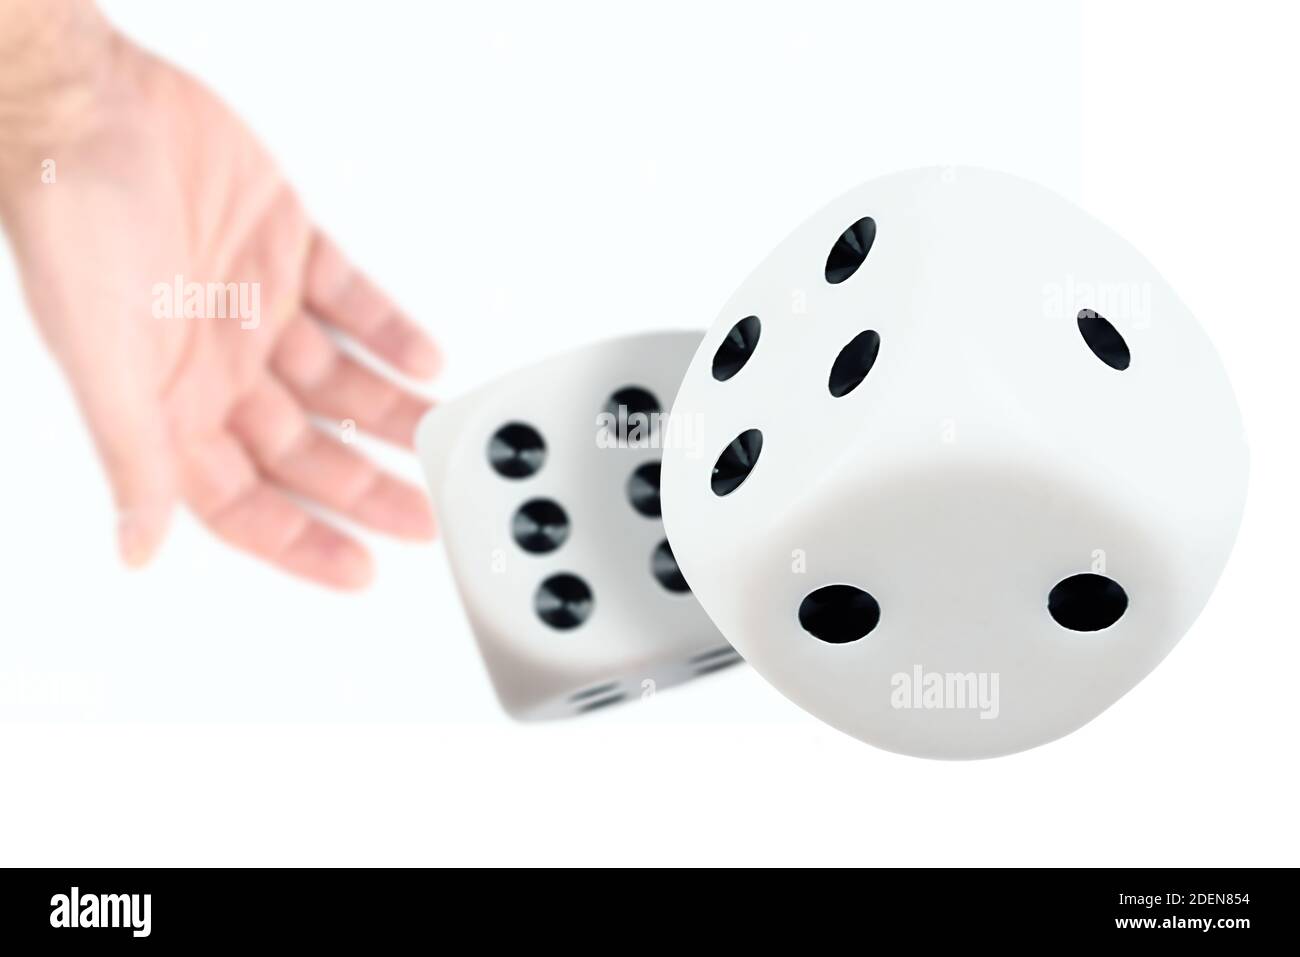 close-up view of hand of person throwing or rolling dice against white background Stock Photo